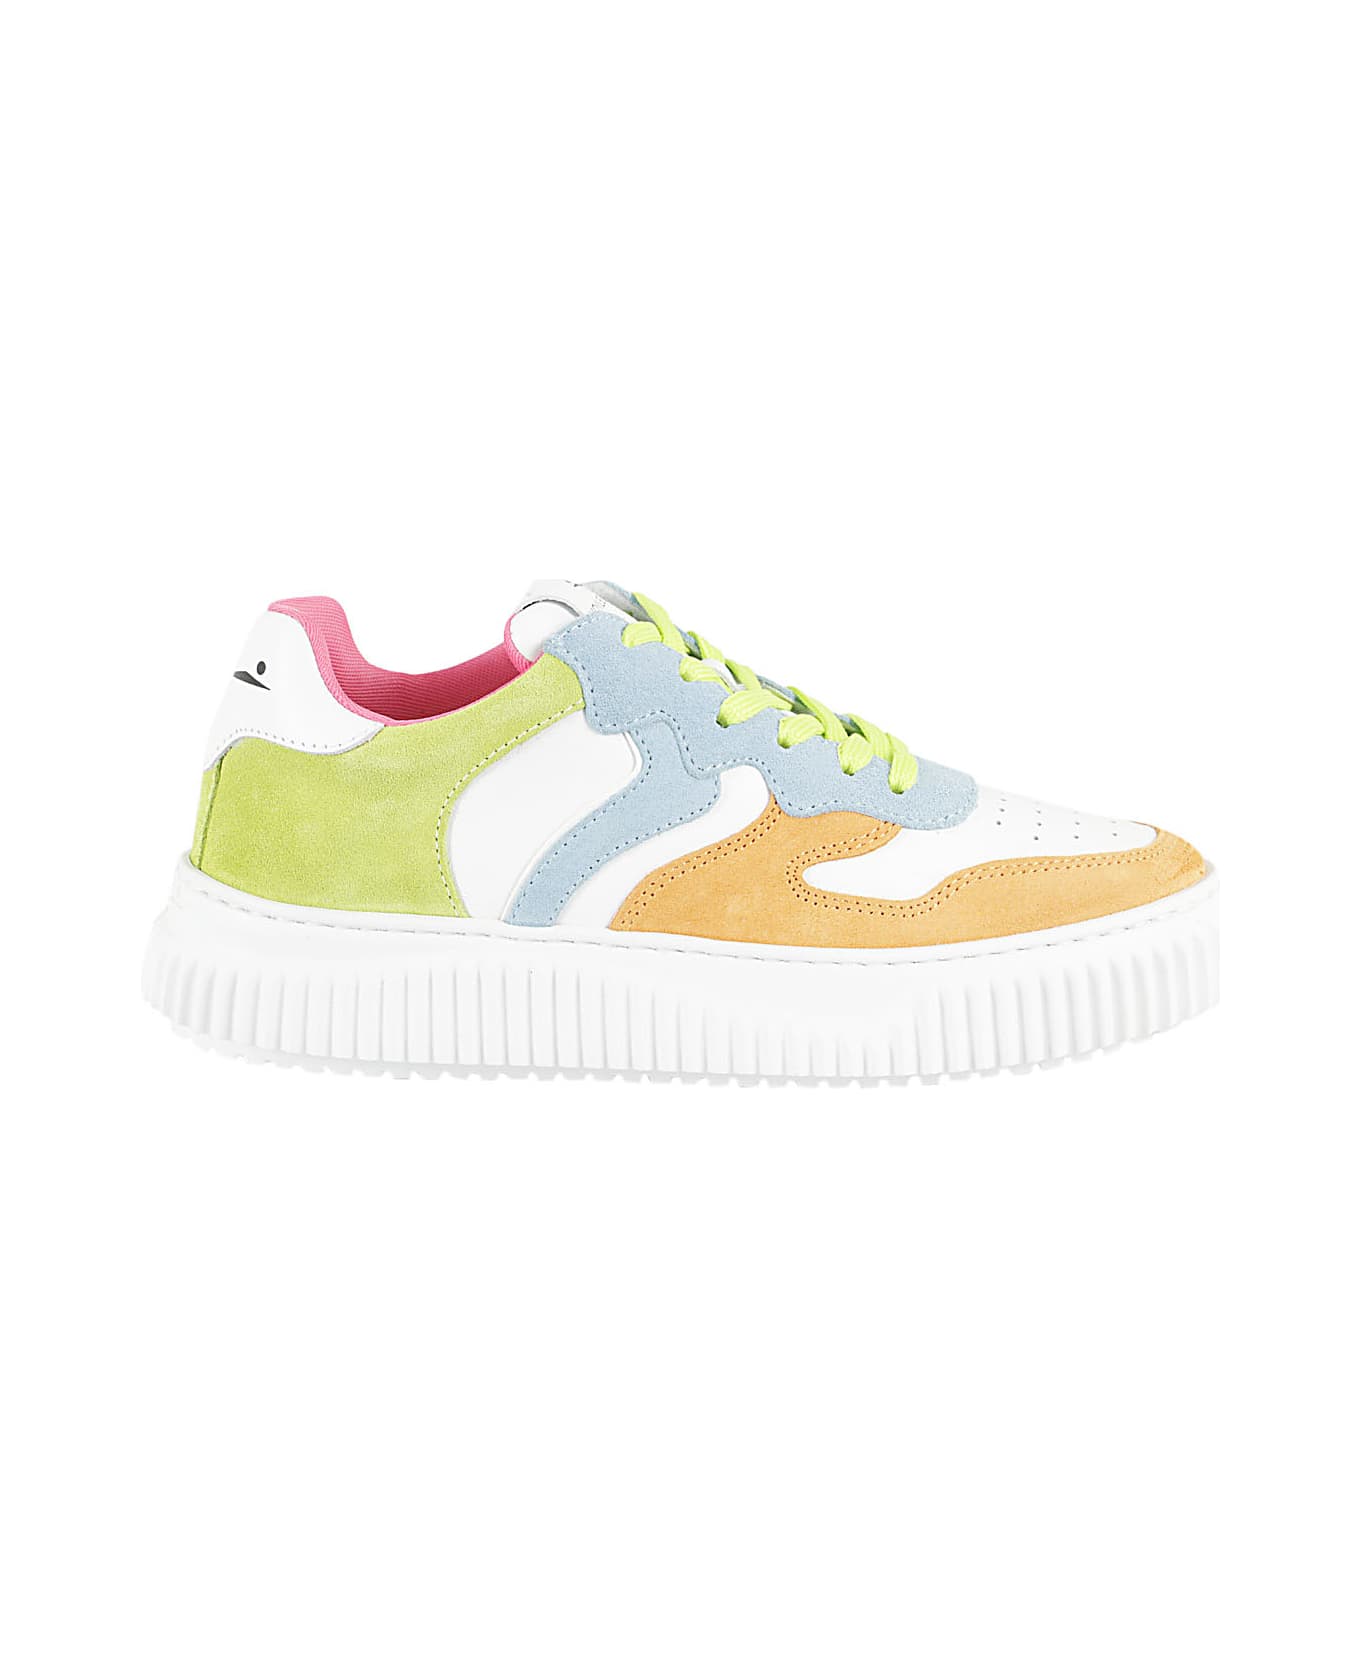 Voile Blanche Laura Suede - Peach Sky Blue Lime